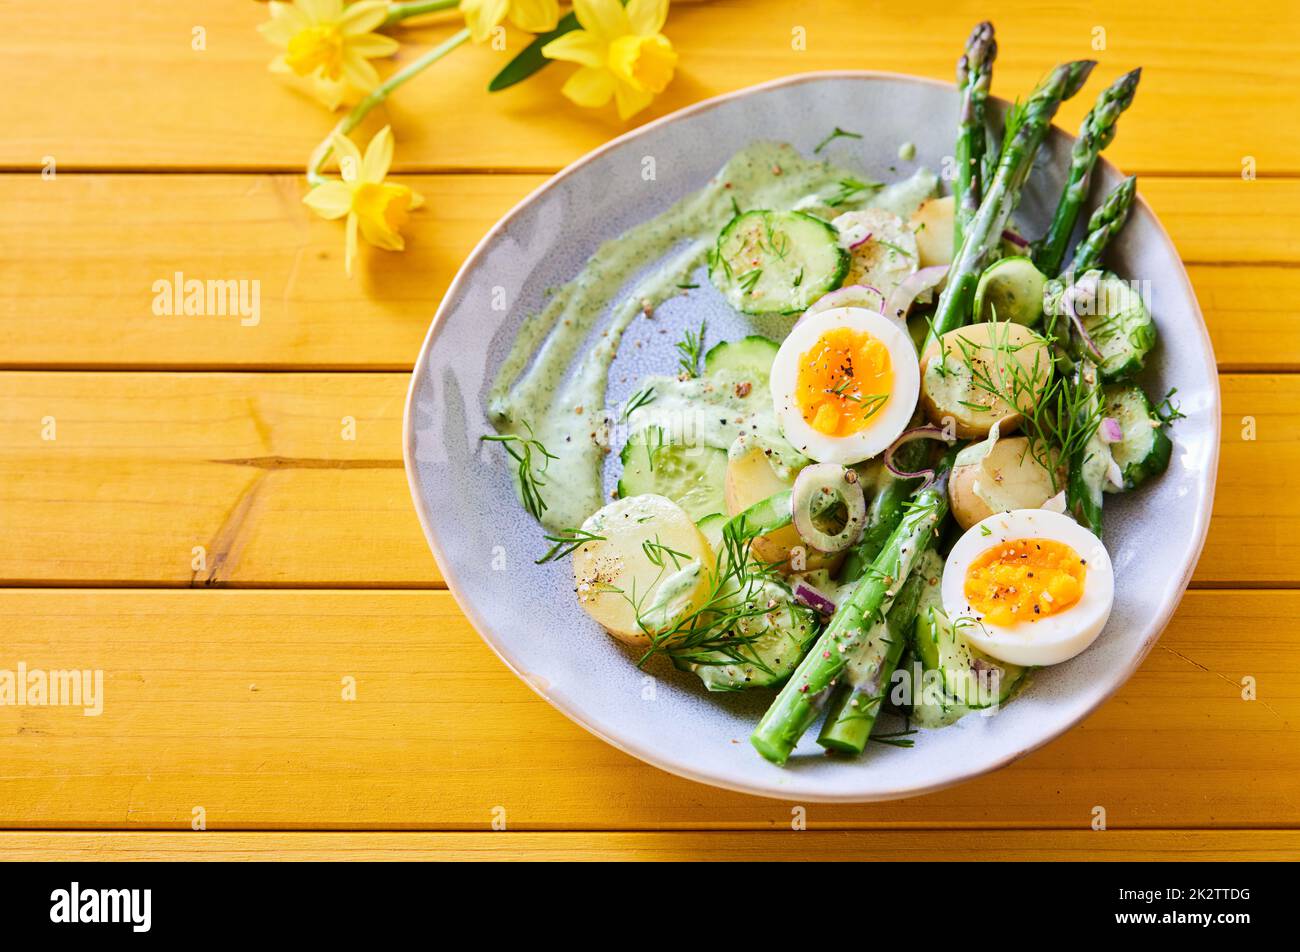 Palatable asparagus salad with eggs and potatoes Stock Photo